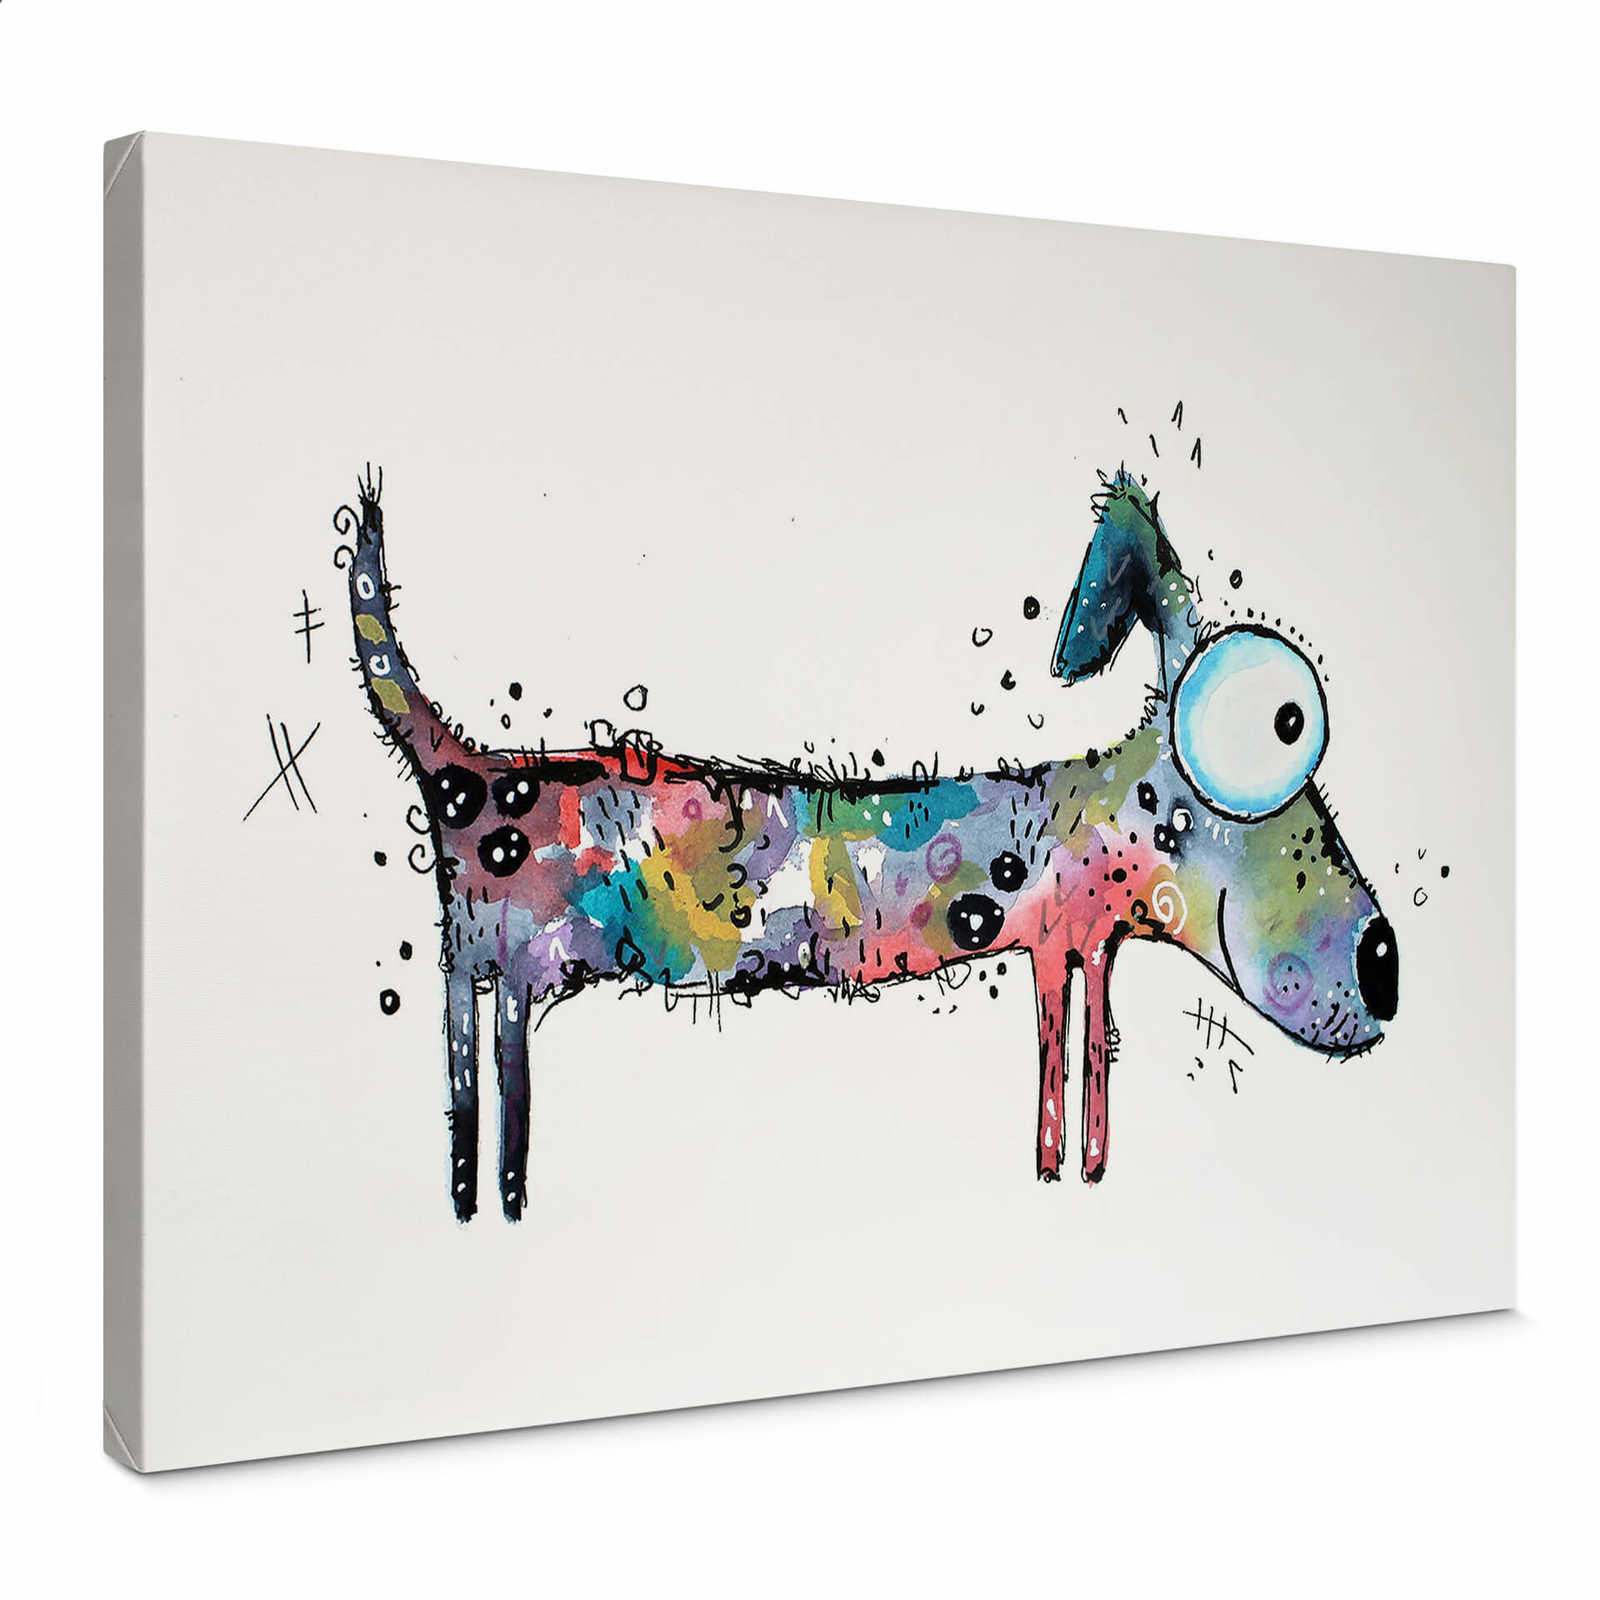         Canvas print dachshund in comic style by Hagenmeyer
    